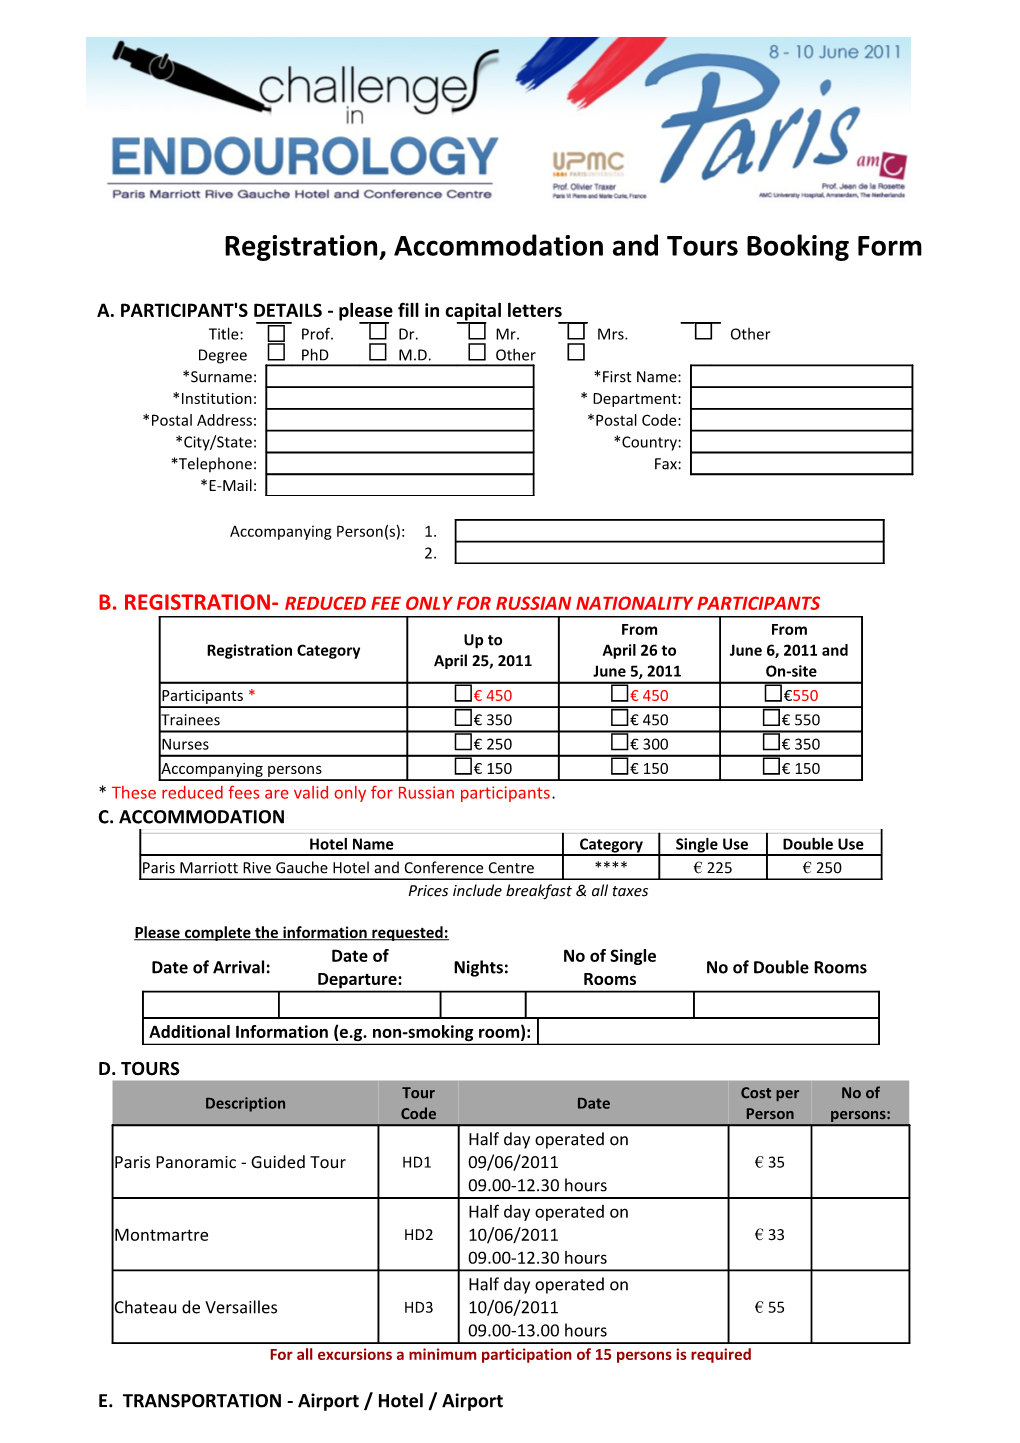 Registration, Accommodation and Tours Booking Form